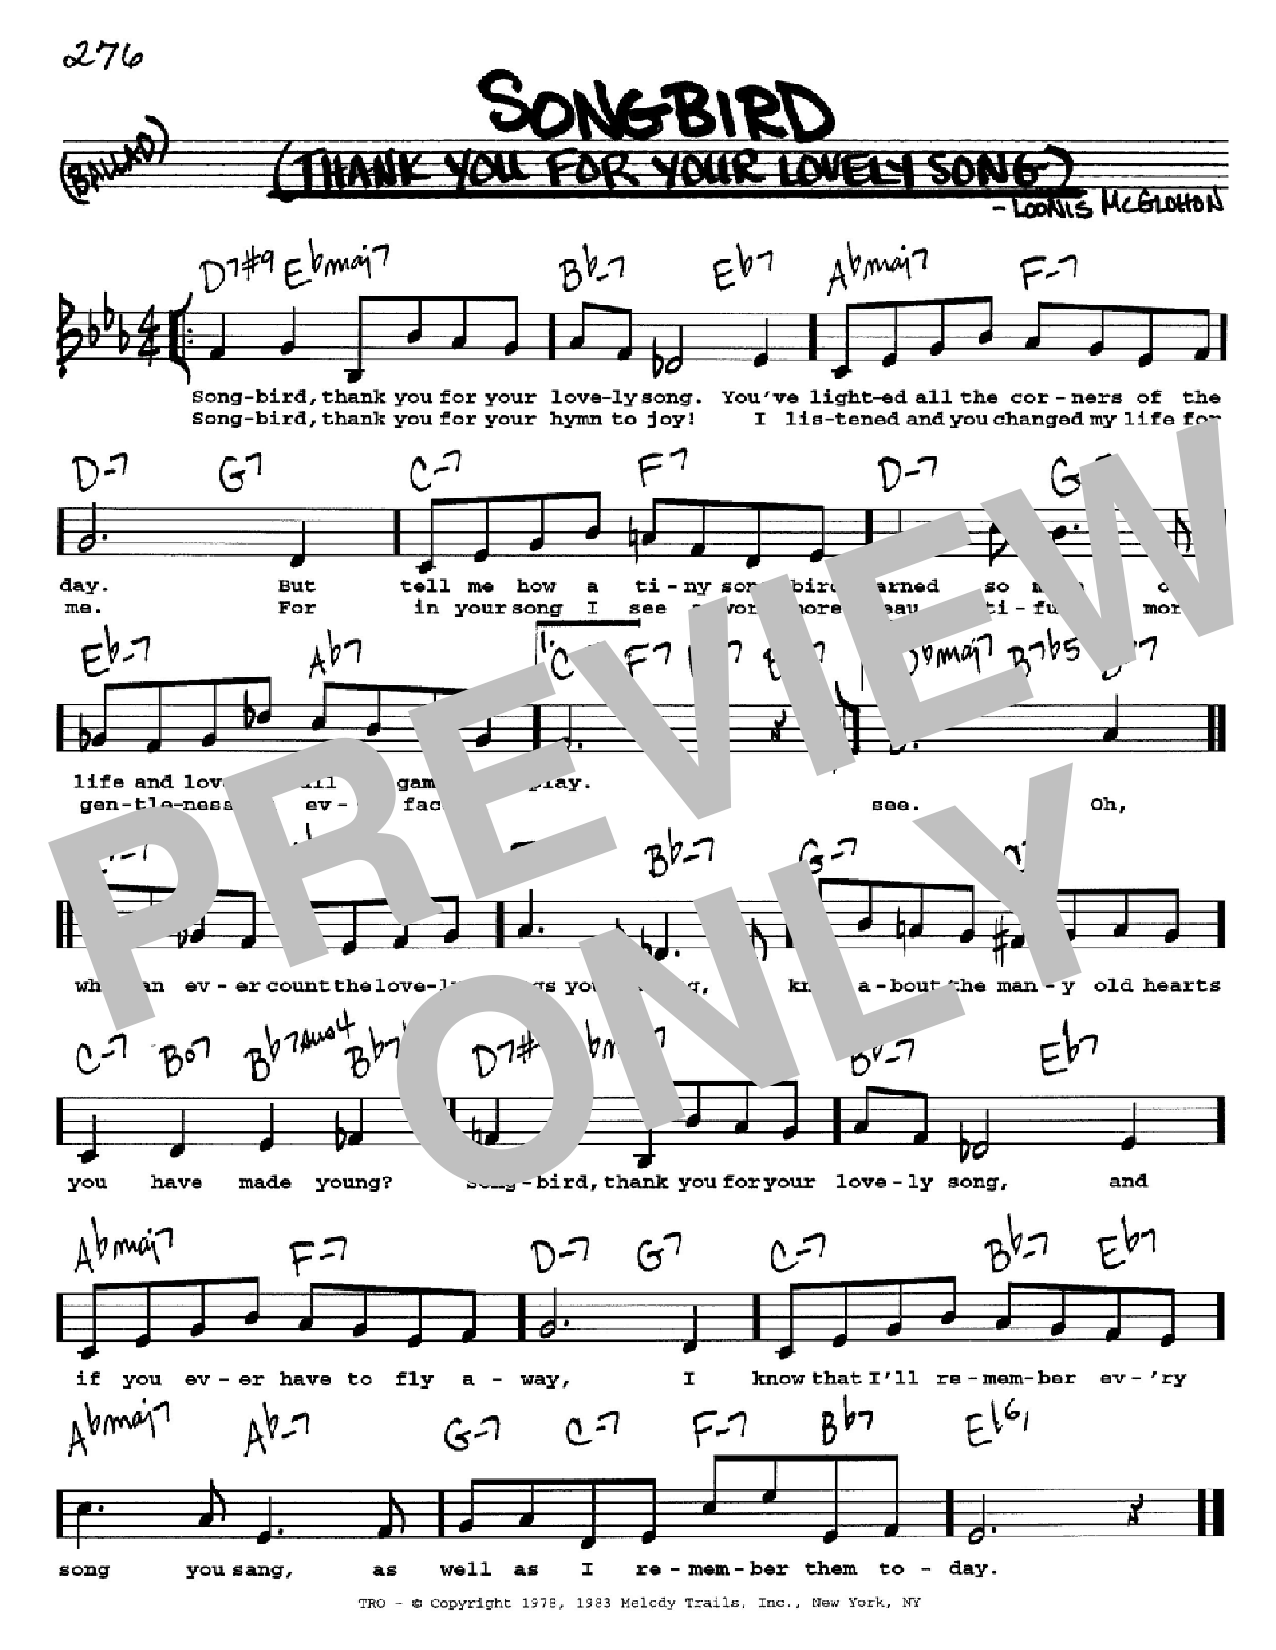 Download Loonis McGlohon Songbird (Thank You For Your Lovely Son Sheet Music